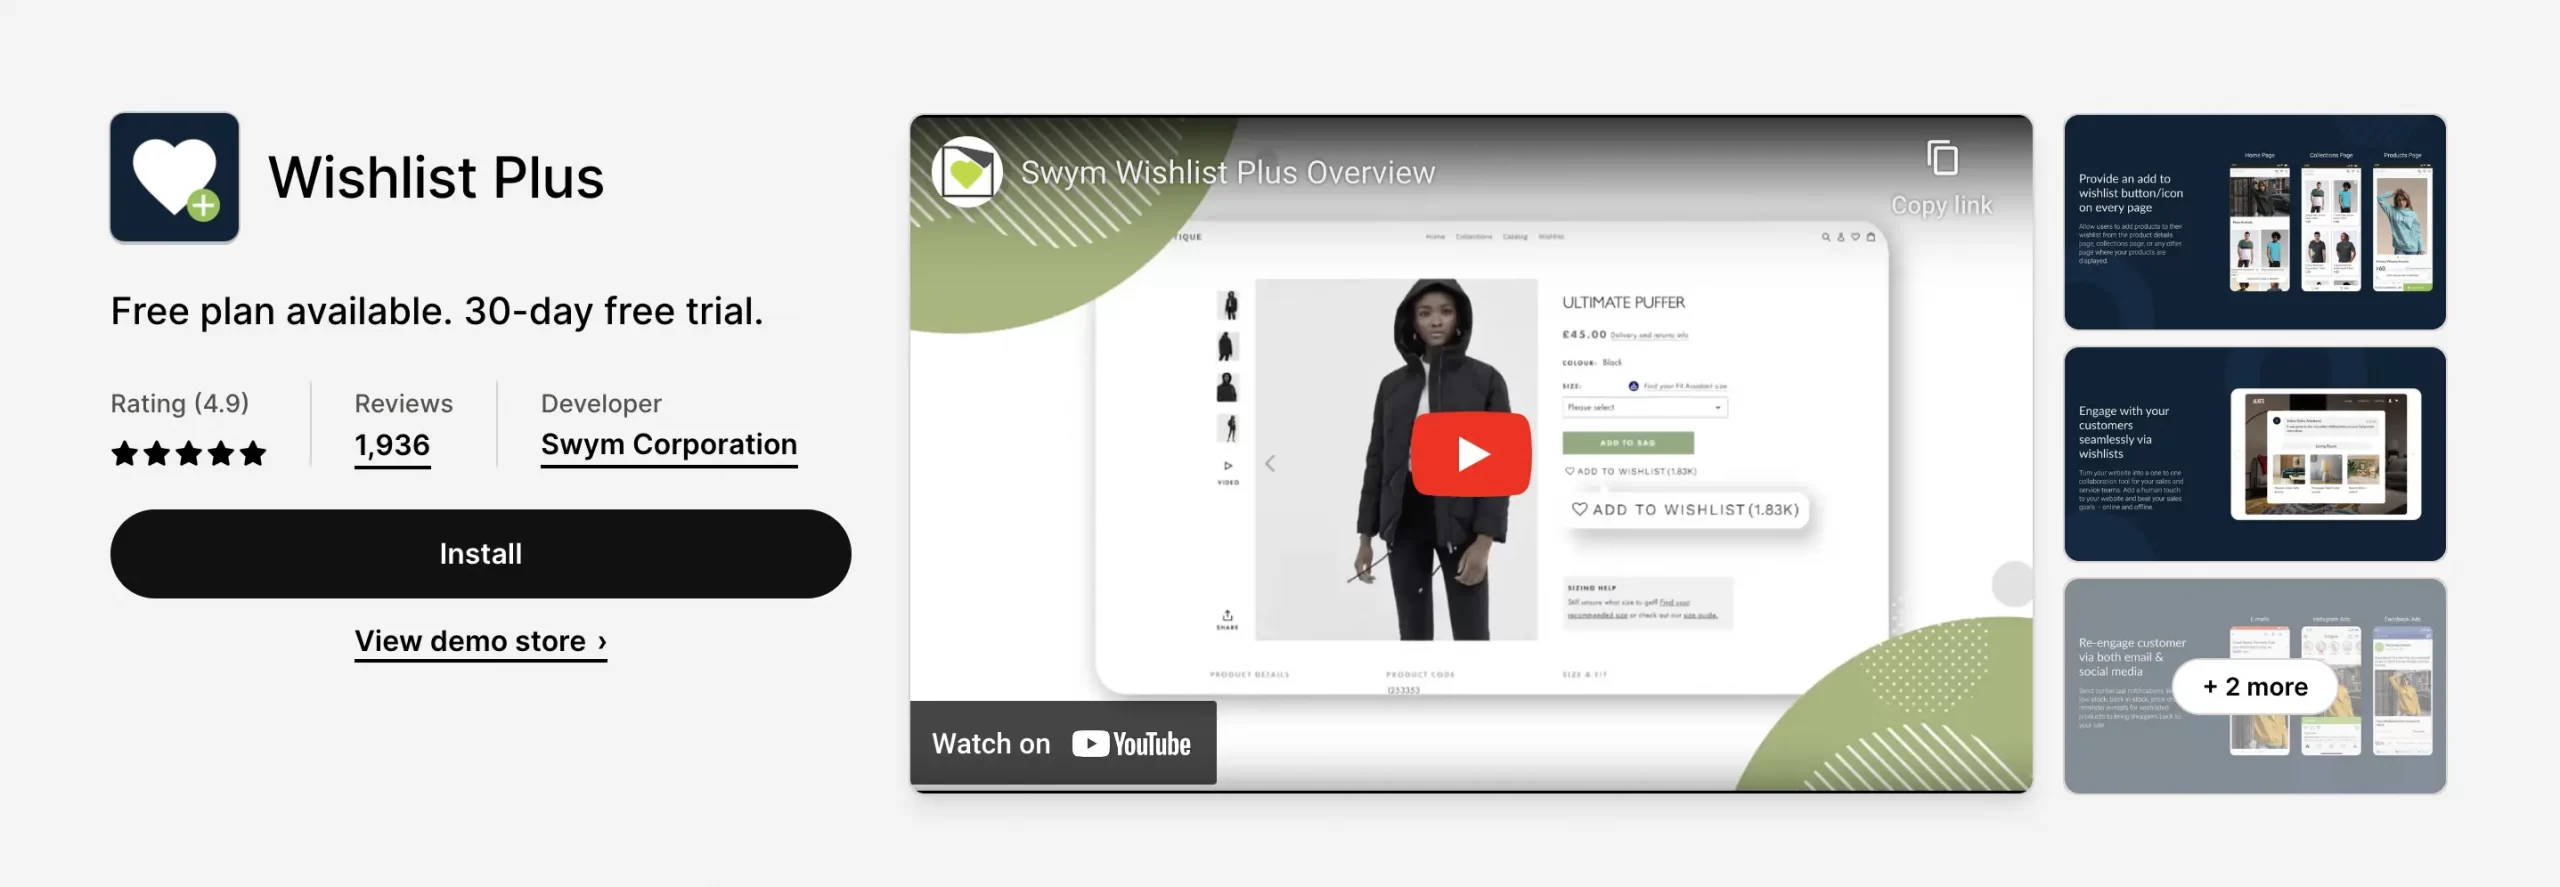 Wishlist Plus aids in an easy wishlist set up that increases conversions.